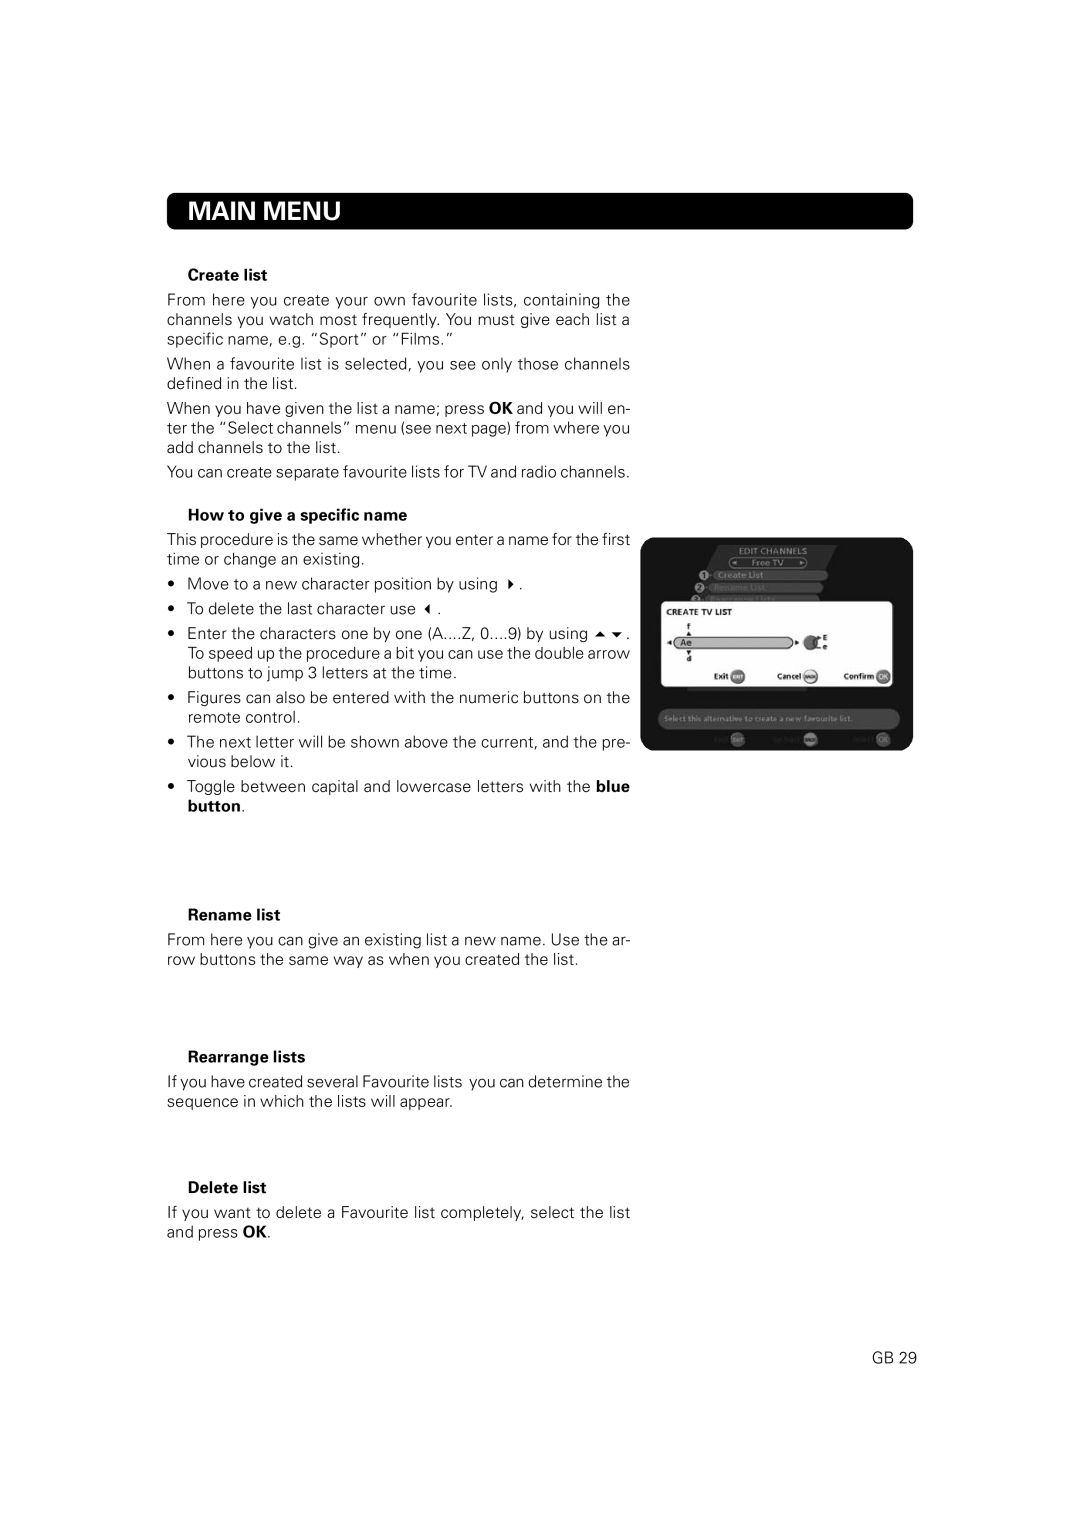 Nokia 9802 S owner manual Main Menu, Create list, How to give a specific name, Rename list, Rearrange lists, Delete list 